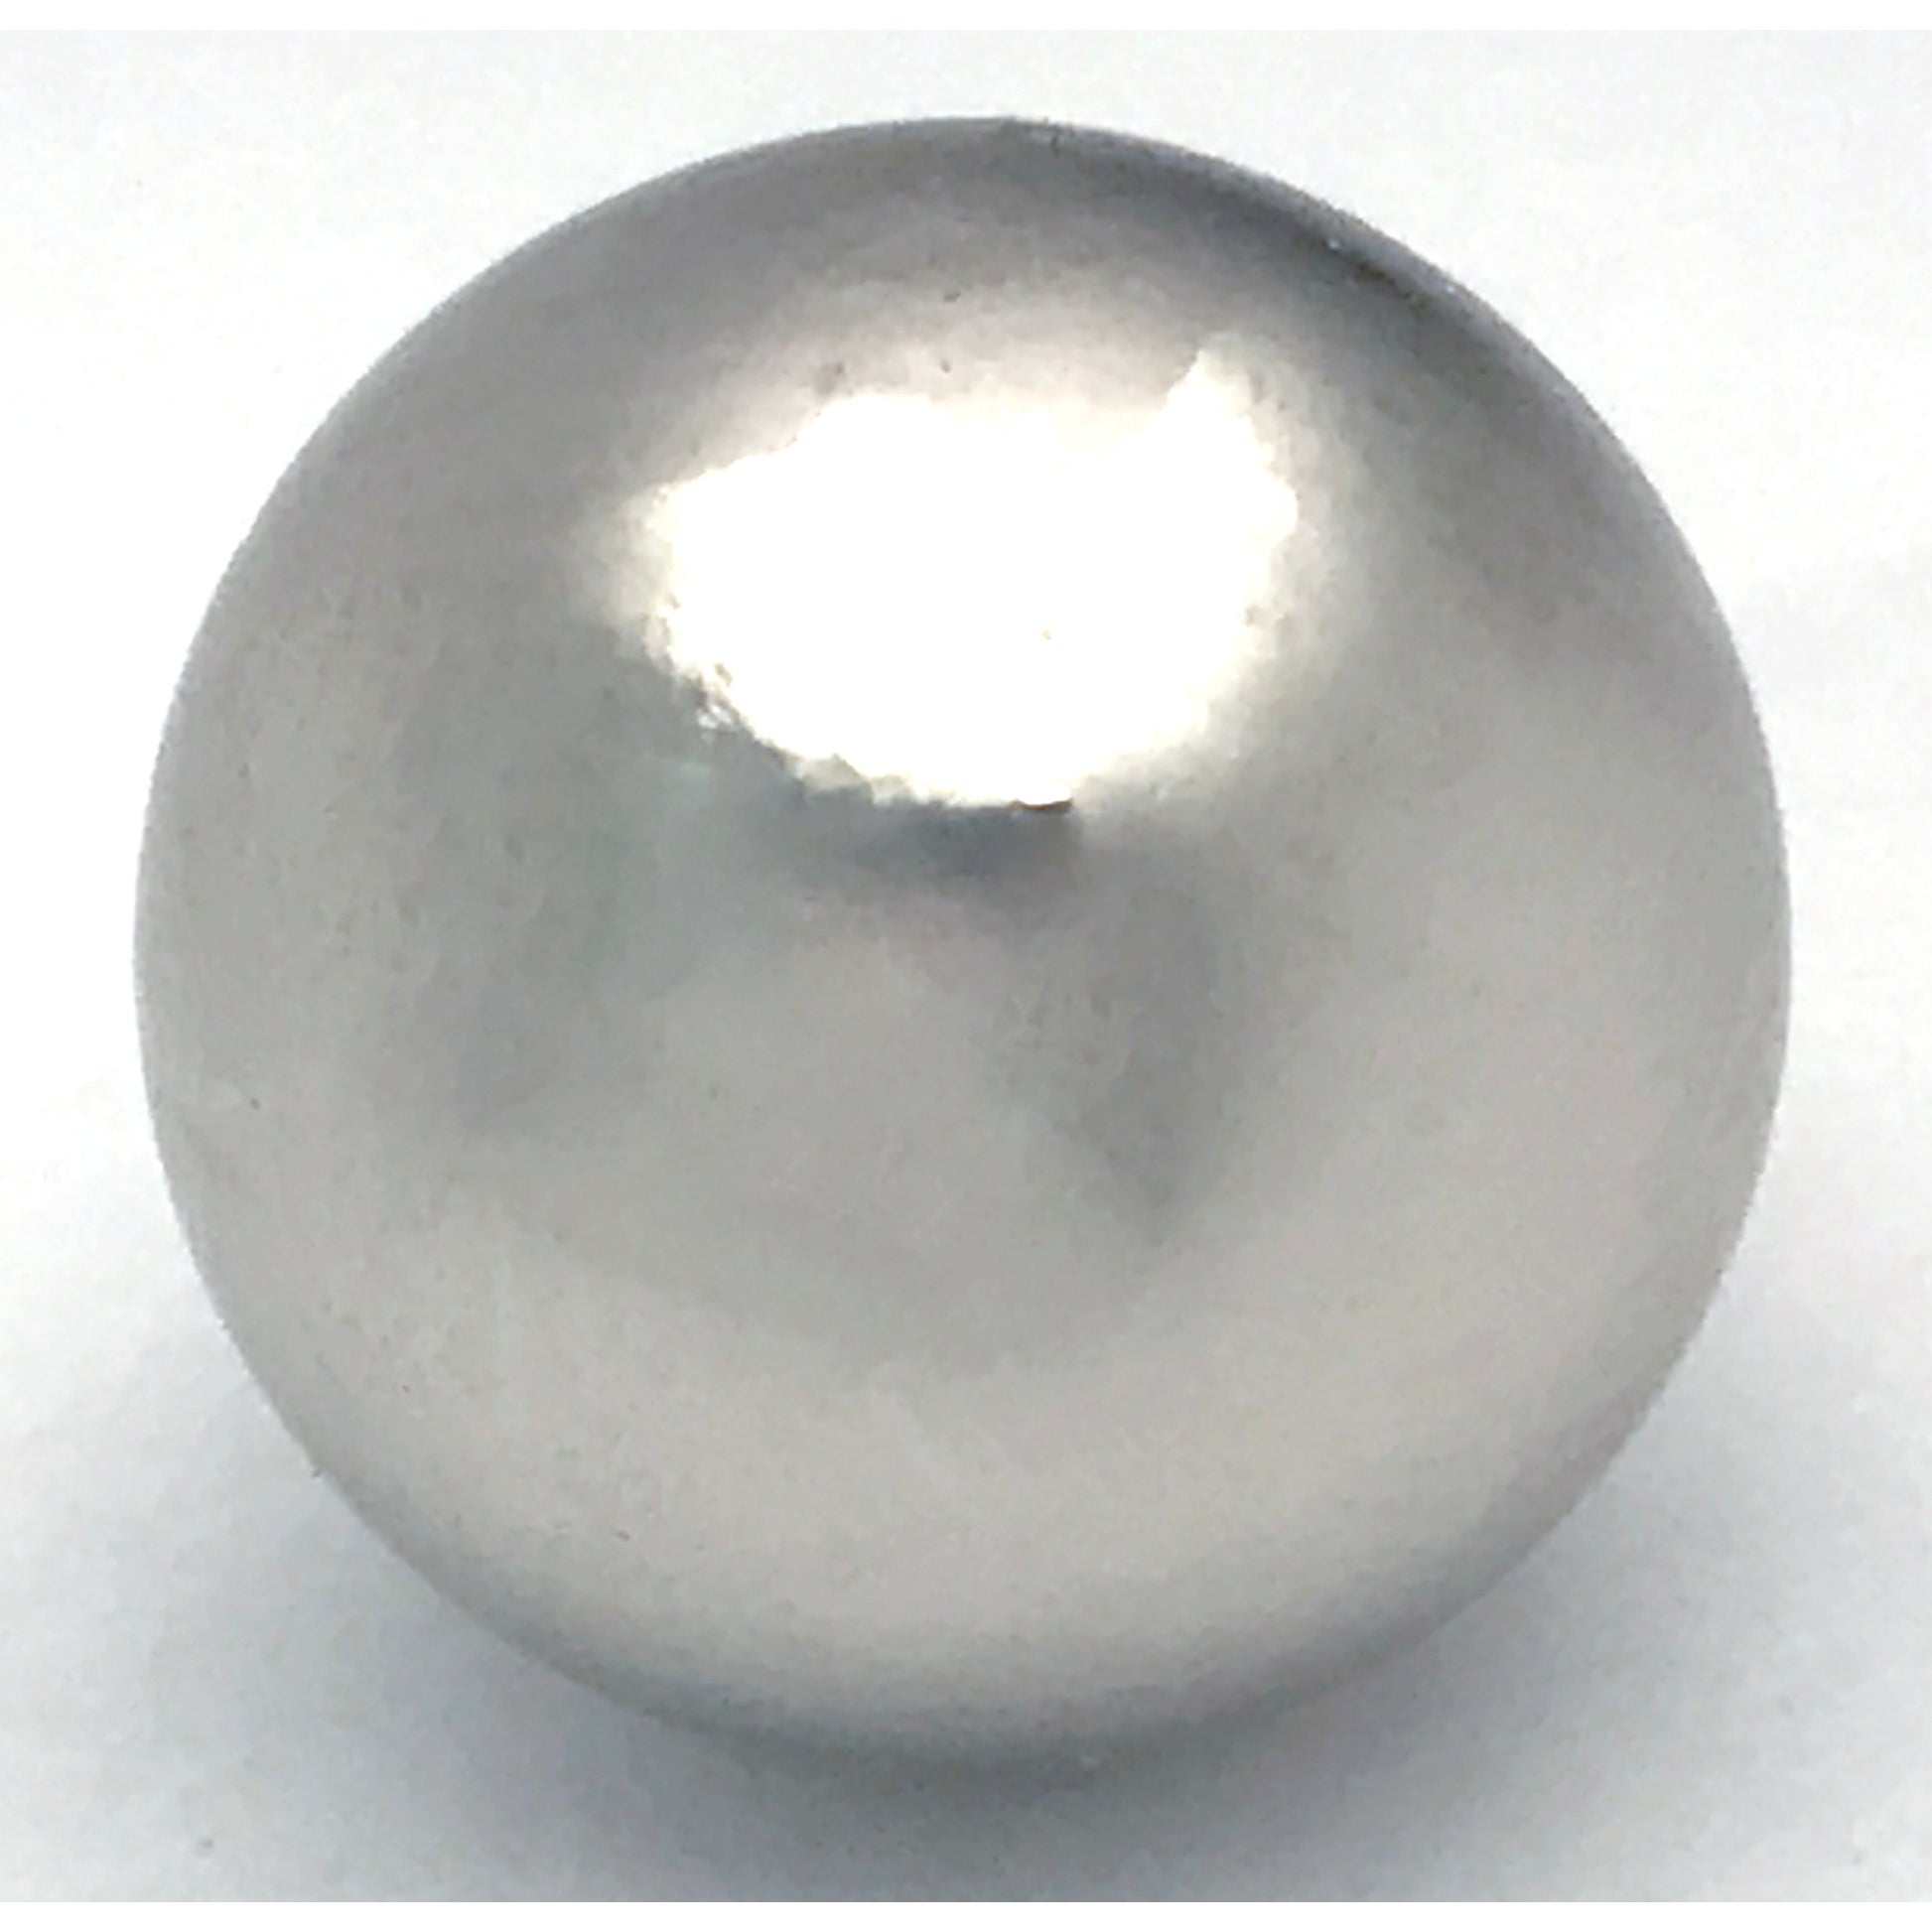 Load image into Gallery viewer, 5XNS75 Neodymium Sphere Magnet - Neo Sphere Random With Path